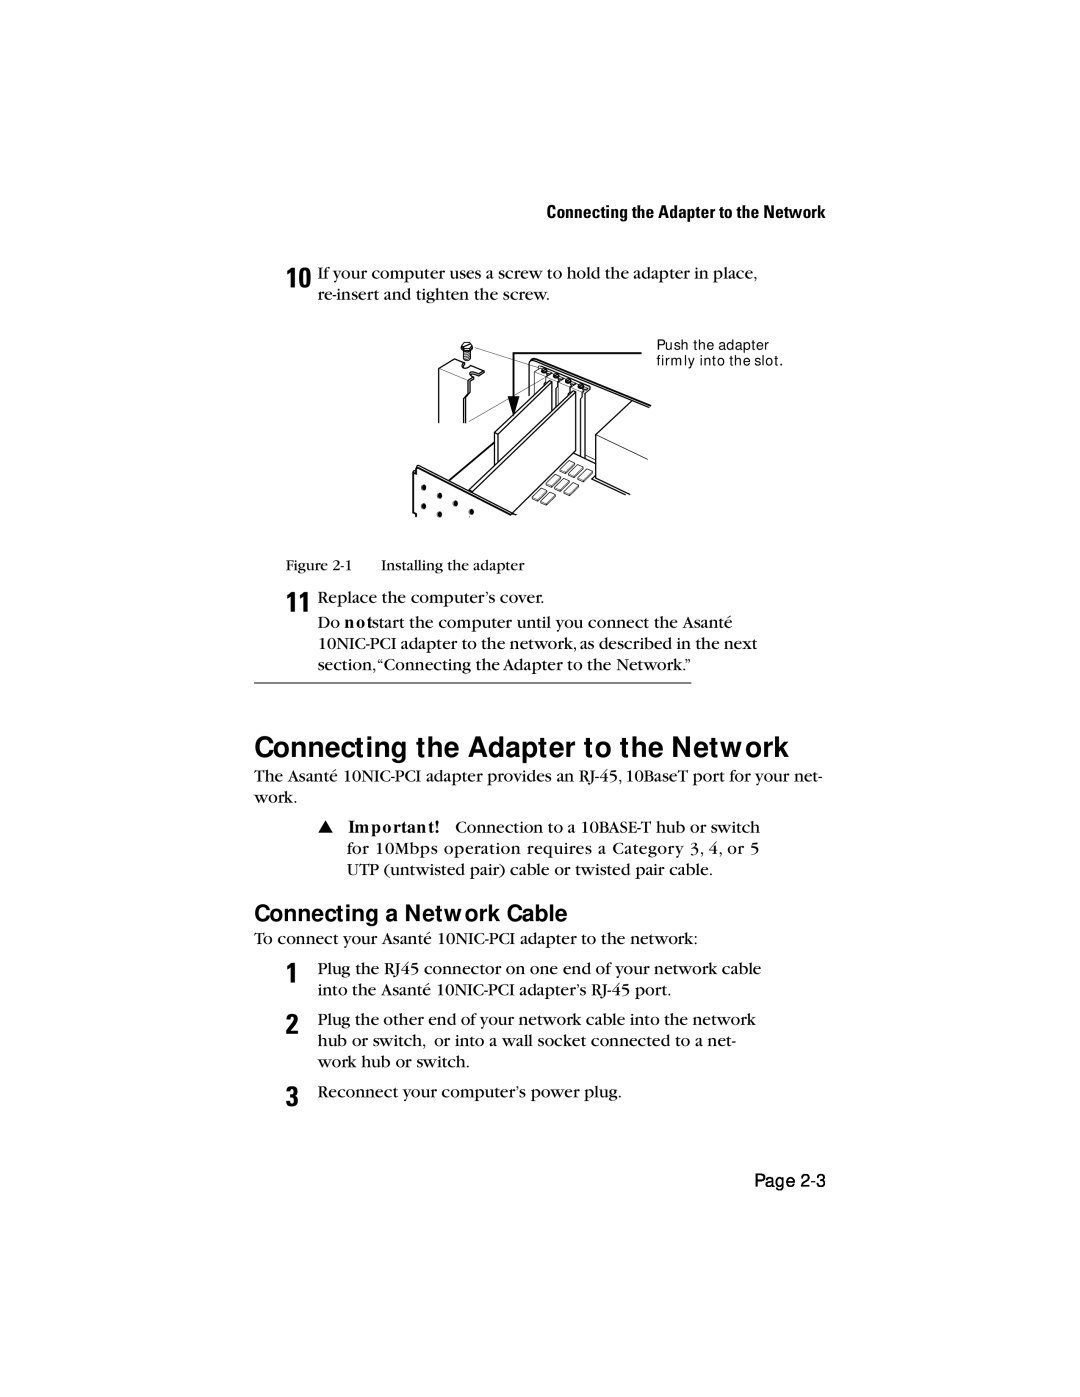 Asante Technologies 10NIC-PCITM manual Connecting the Adapter to the Network, Connecting a Network Cable 